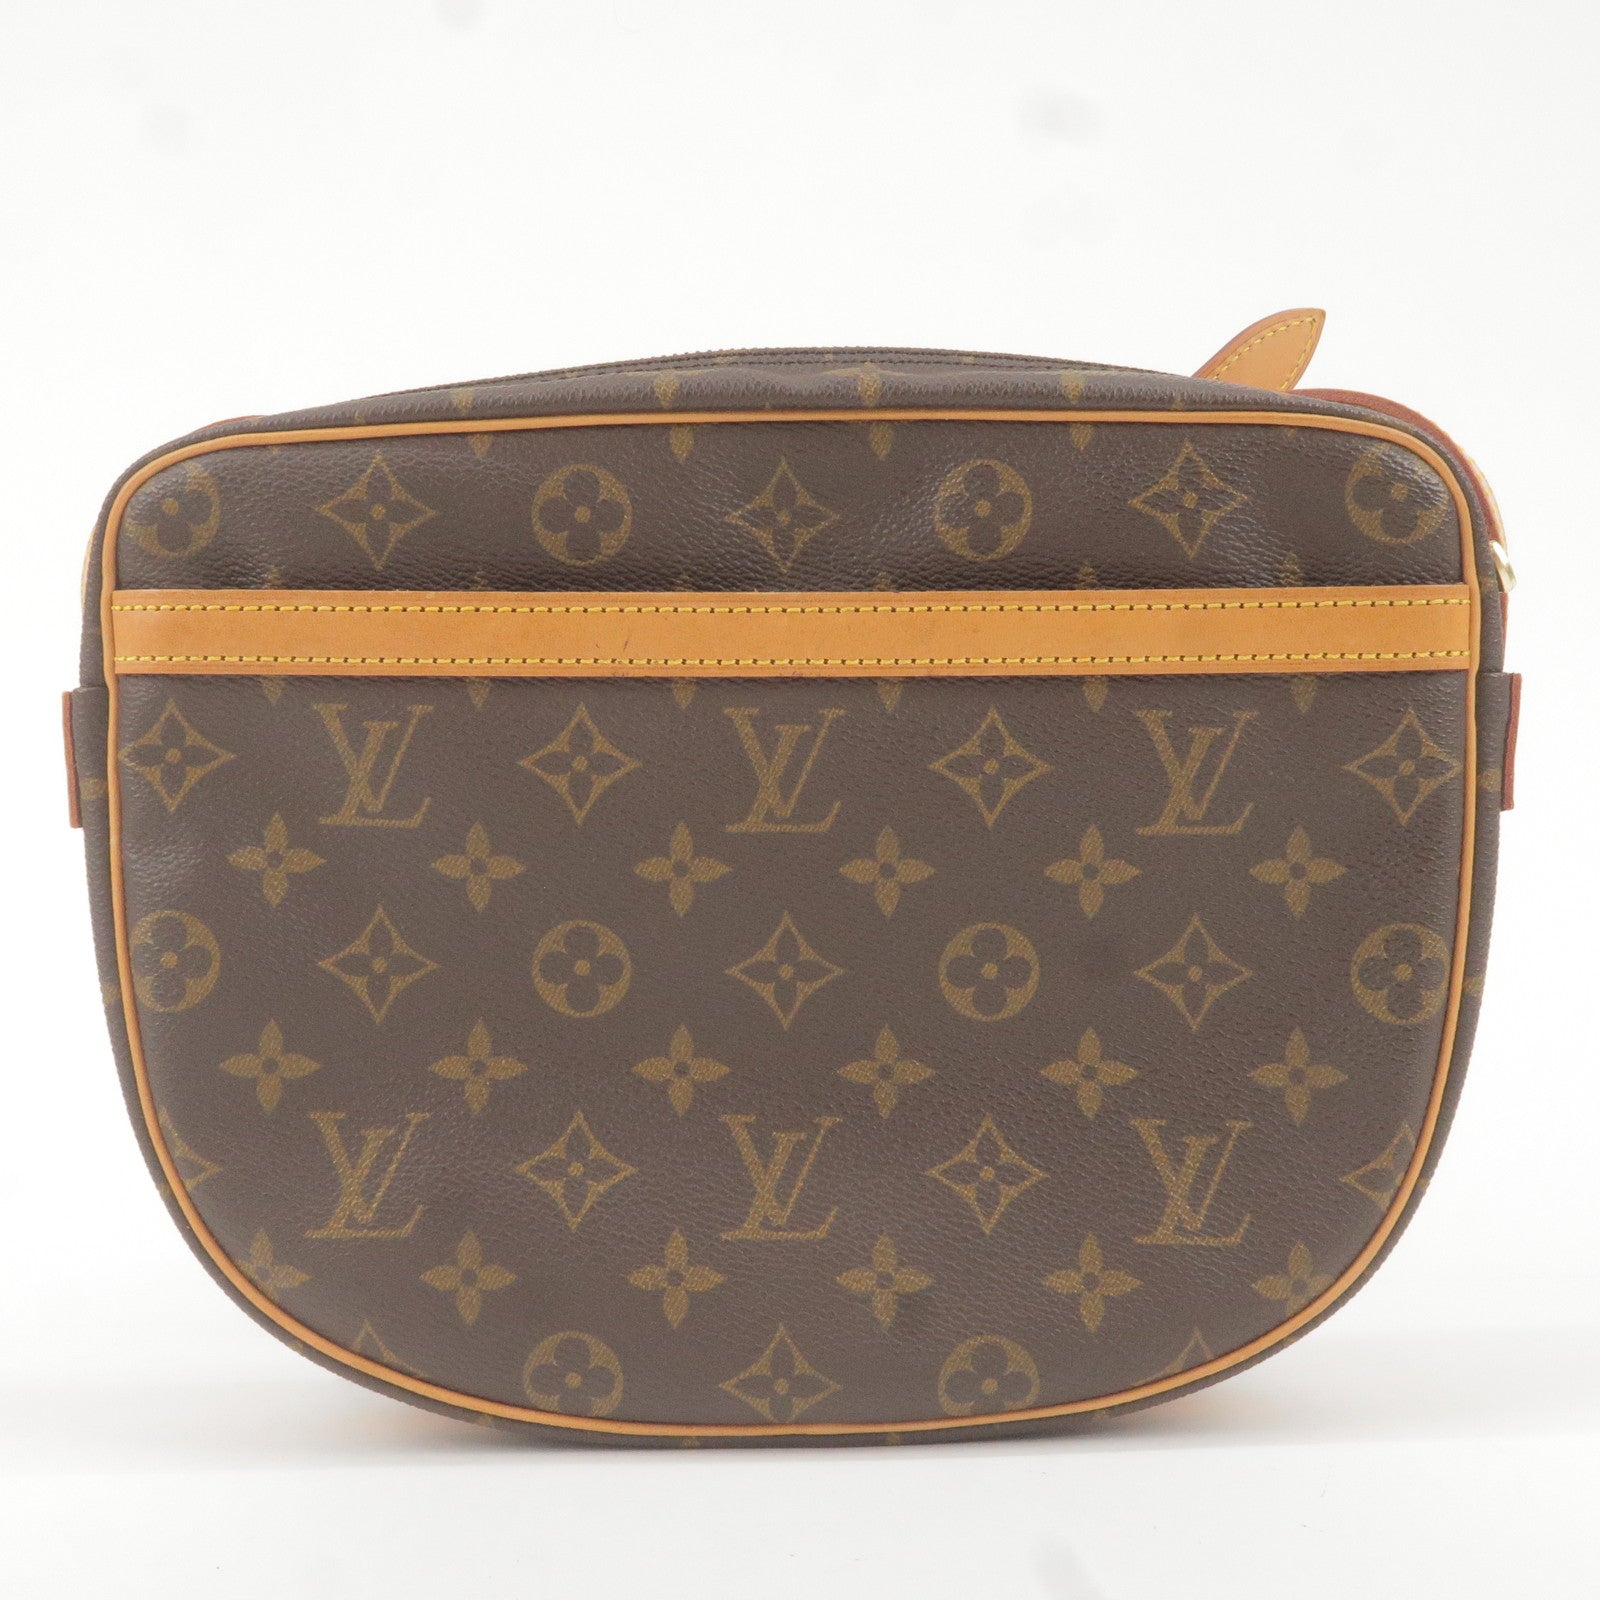 Vintage Bags UK - Louis Vuitton Trotteur Bag Very similar to the pochette,  most Trotteur bags have the cross body strap, so this one has been replaced  by a short strap at